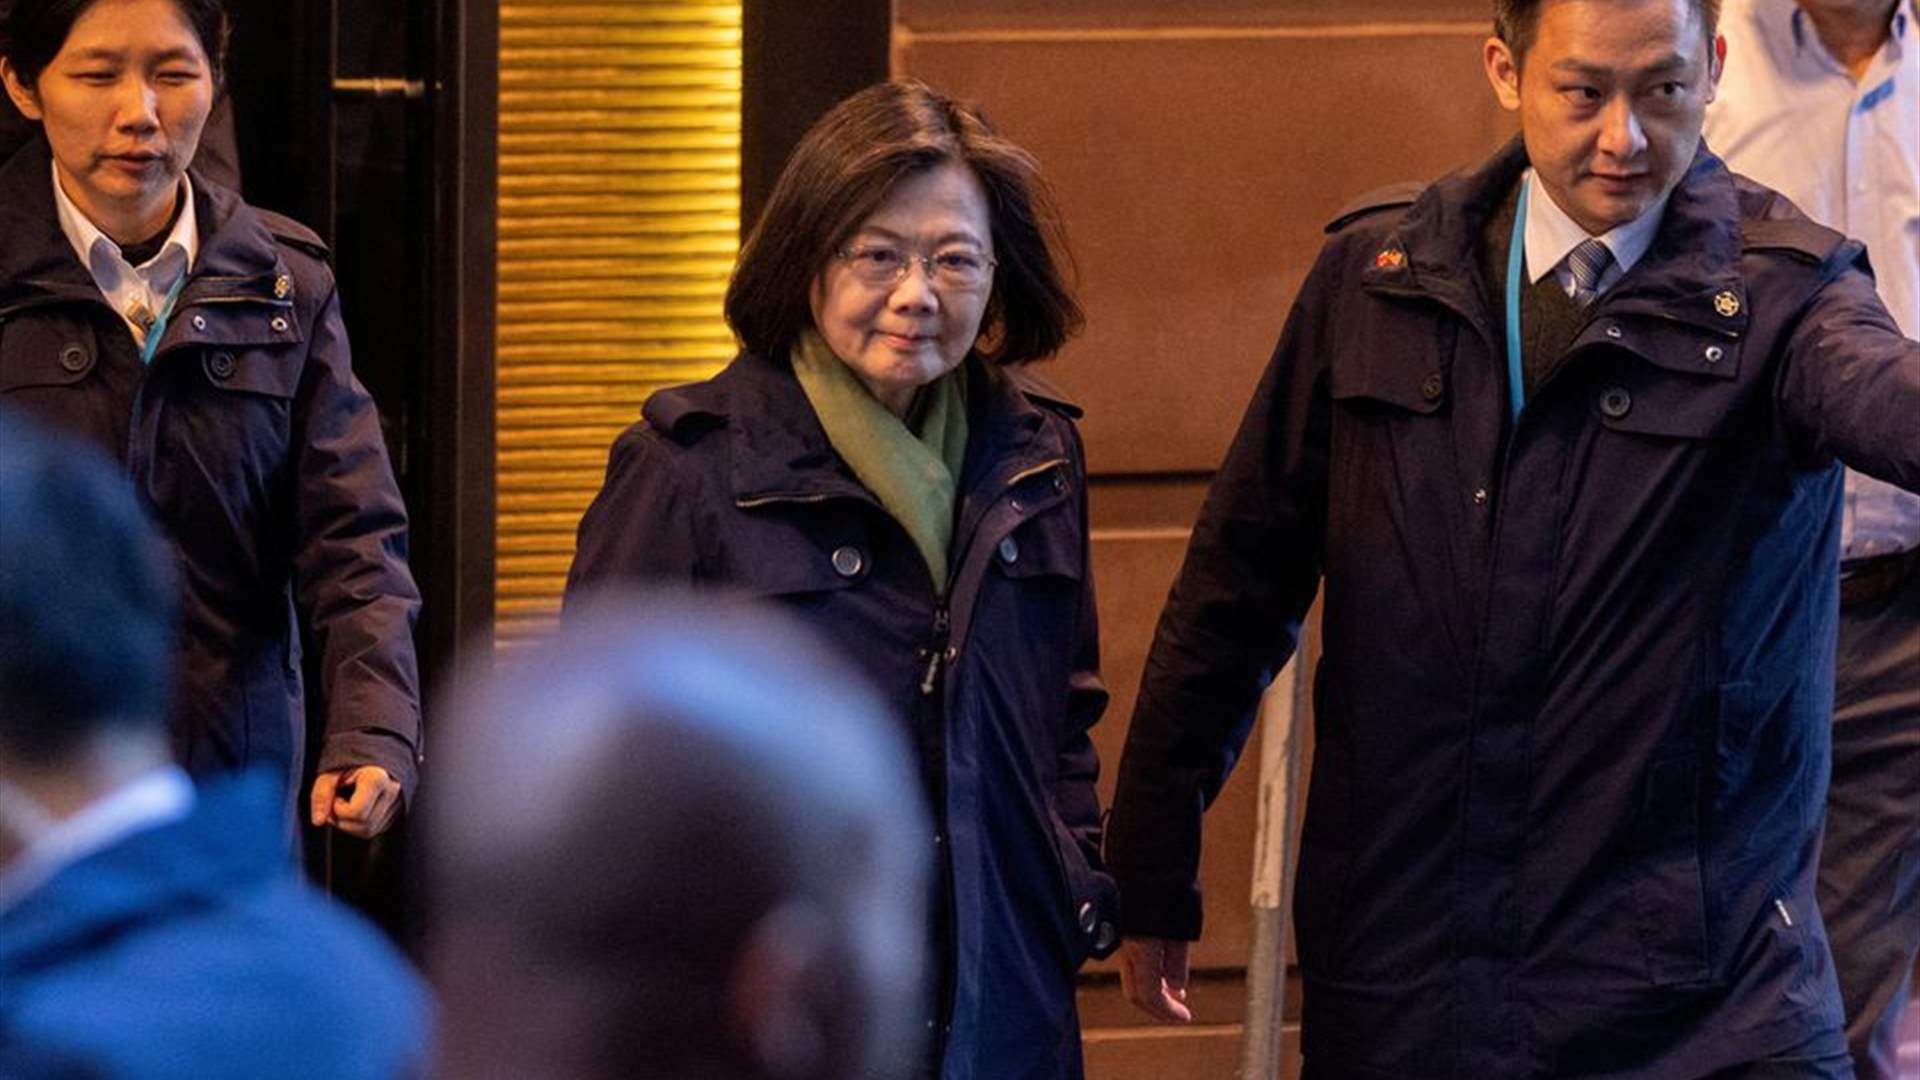 Taiwan calm in face of China raising tensions, President Tsai says in New York 